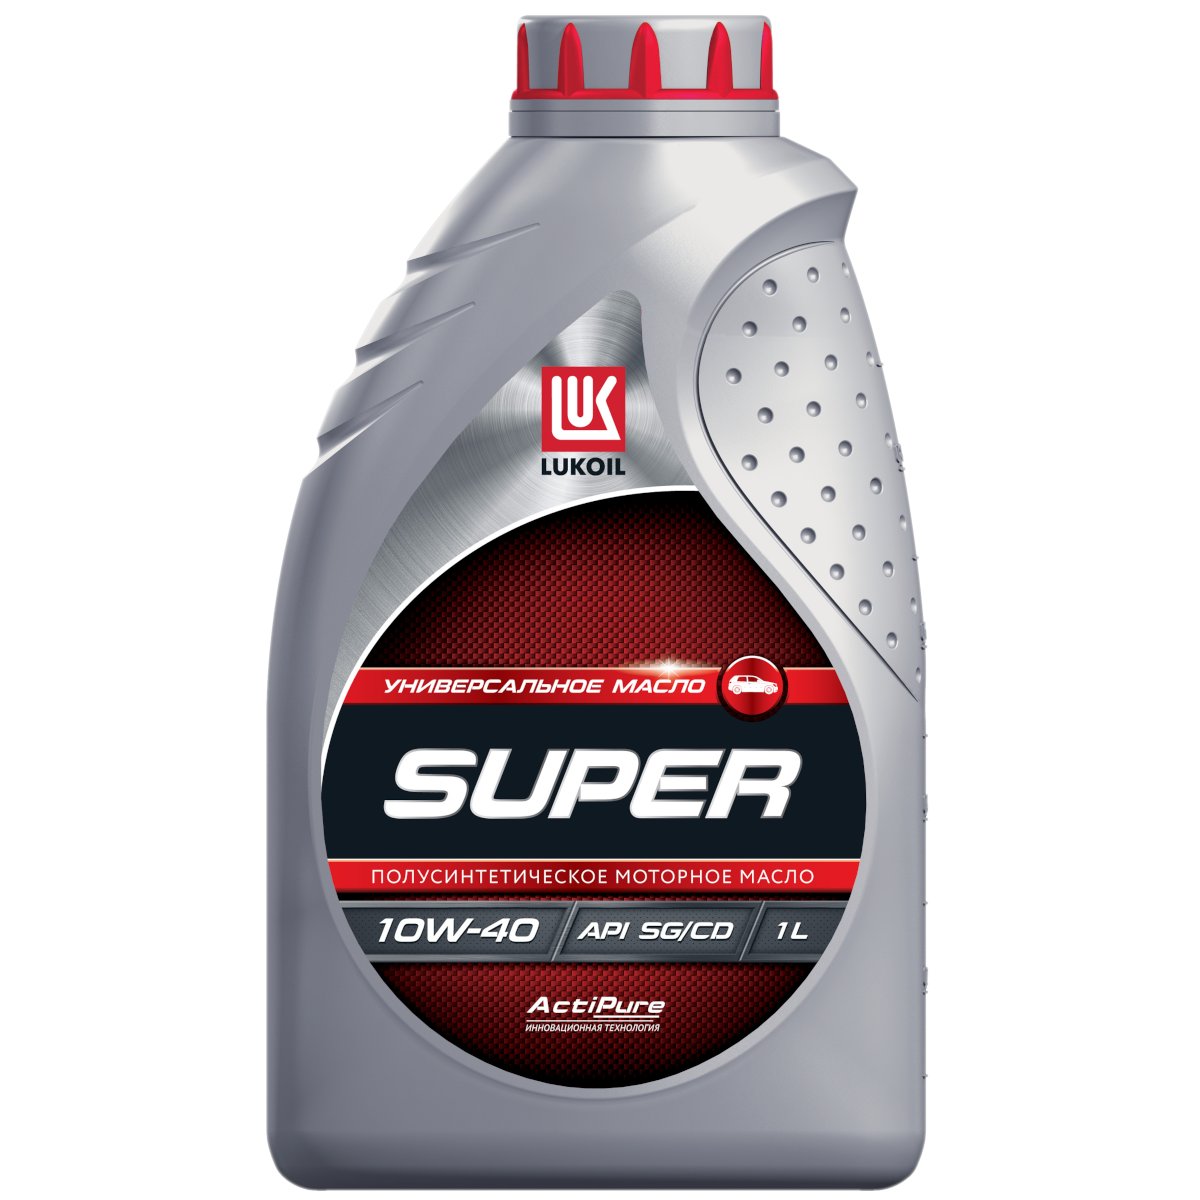 Масло моторное LUKOIL SUPER 10W-40 1 л